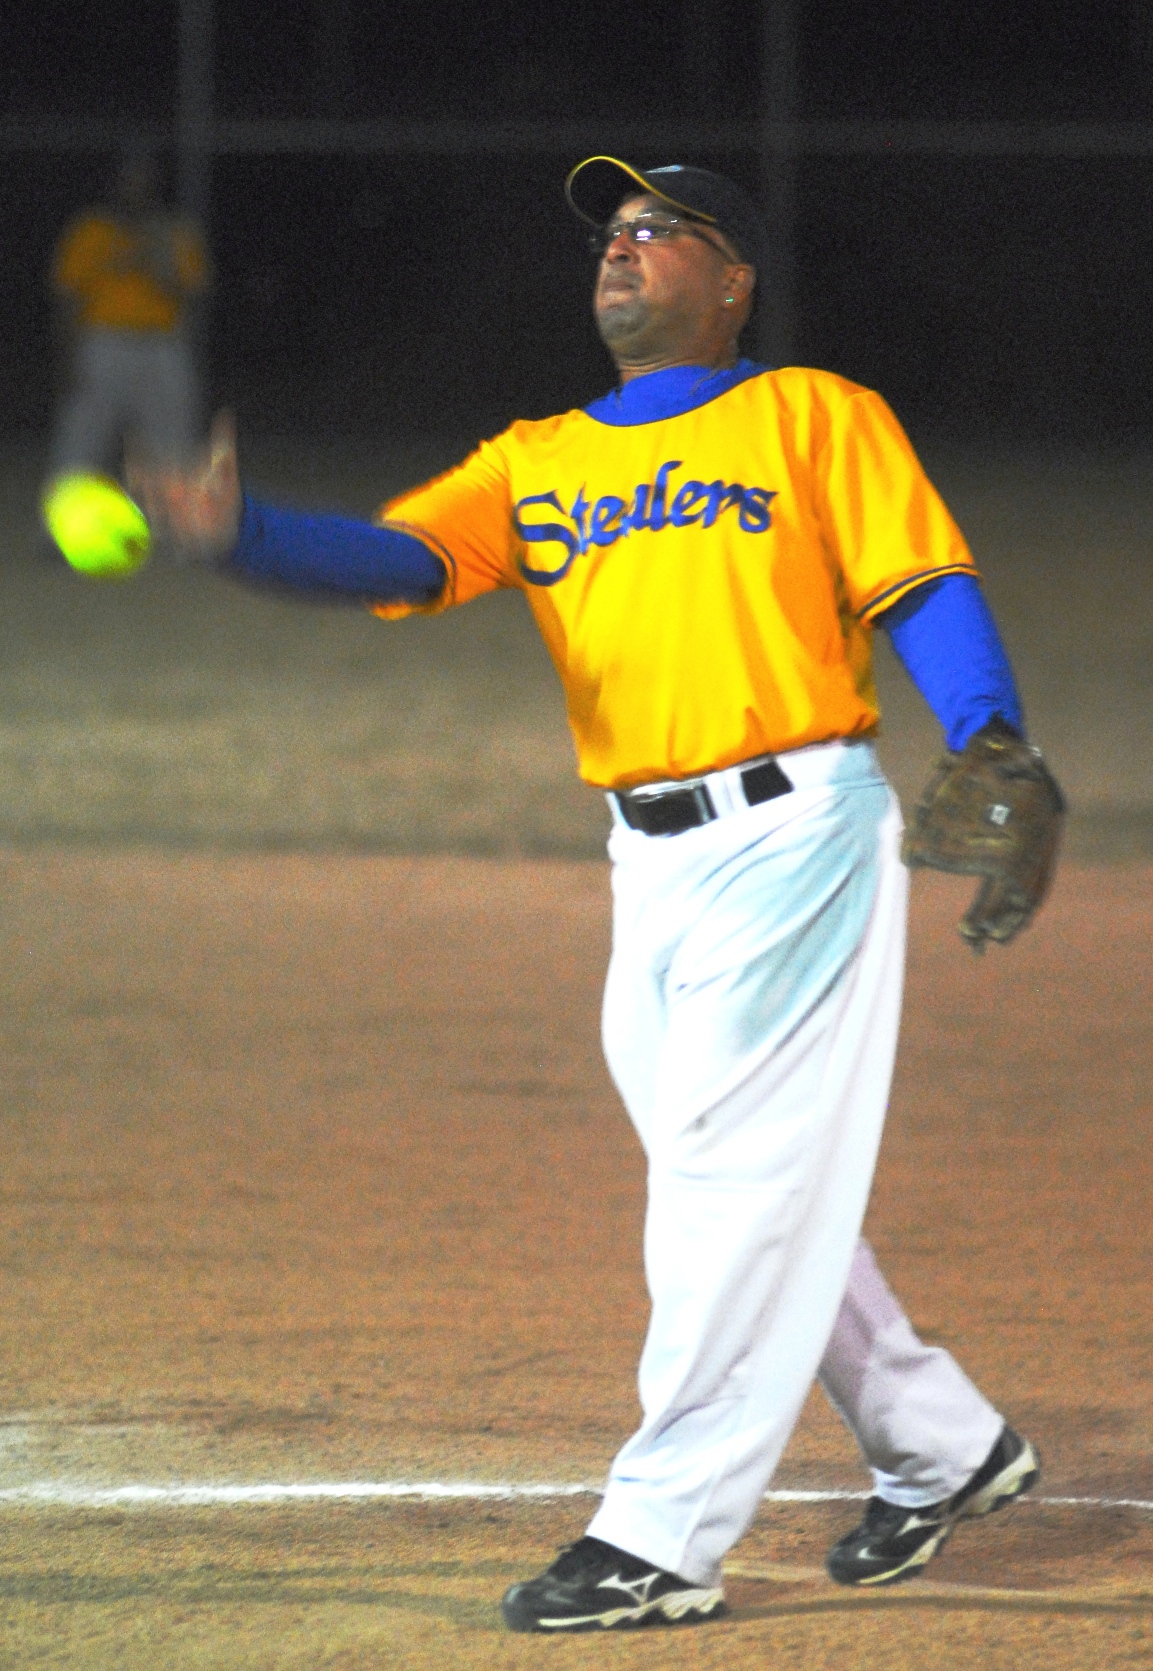 Stealers ace Sam Ramos pitched 14 innings, and was 3 for 3 in game two on Monday .